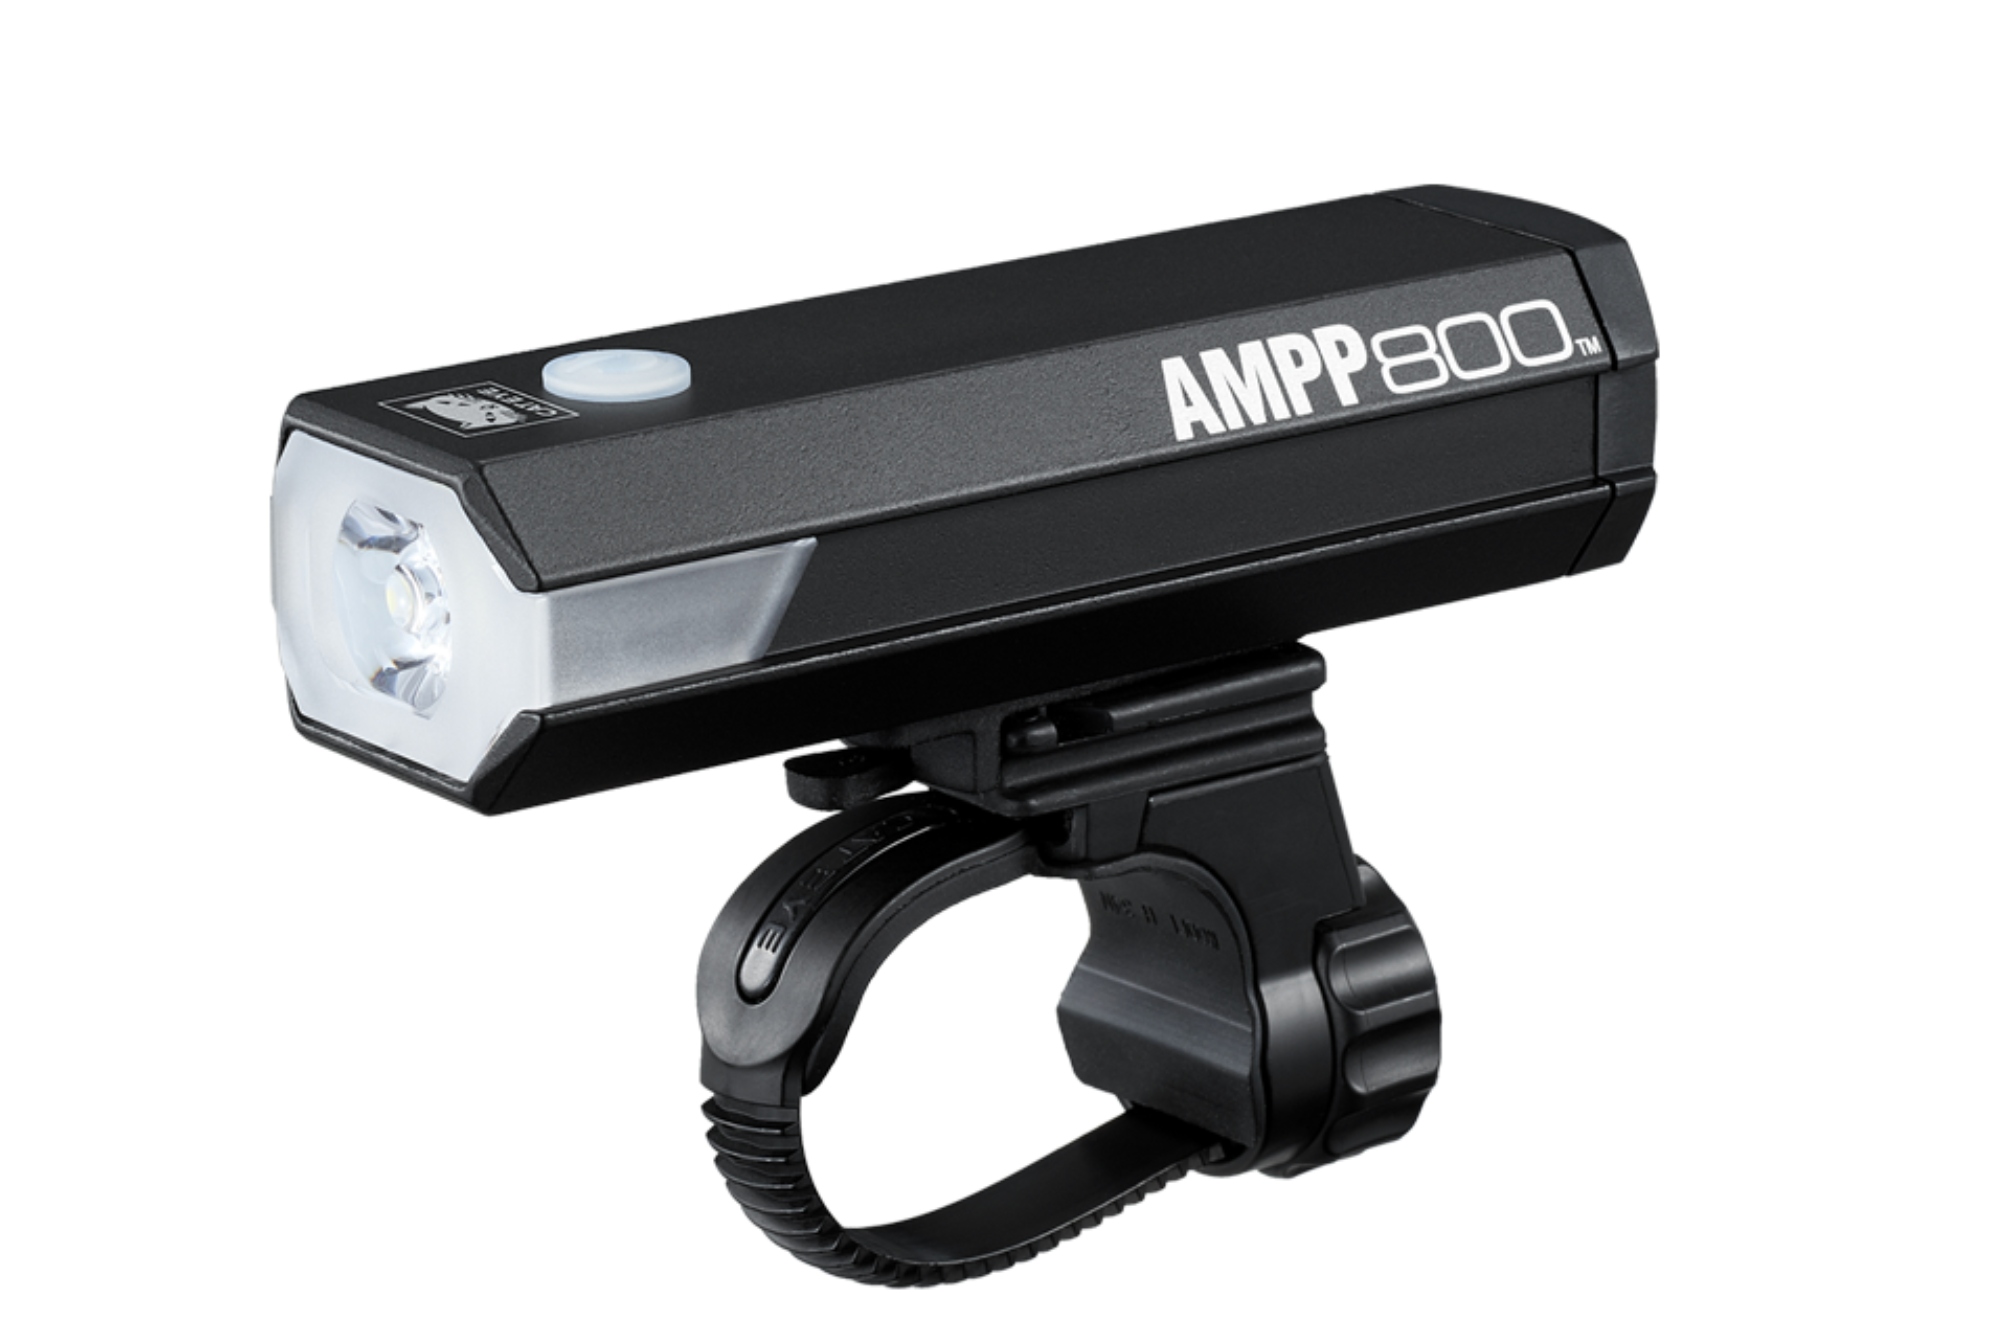 Cateye AMPP 800 front light | Cycling Weekly